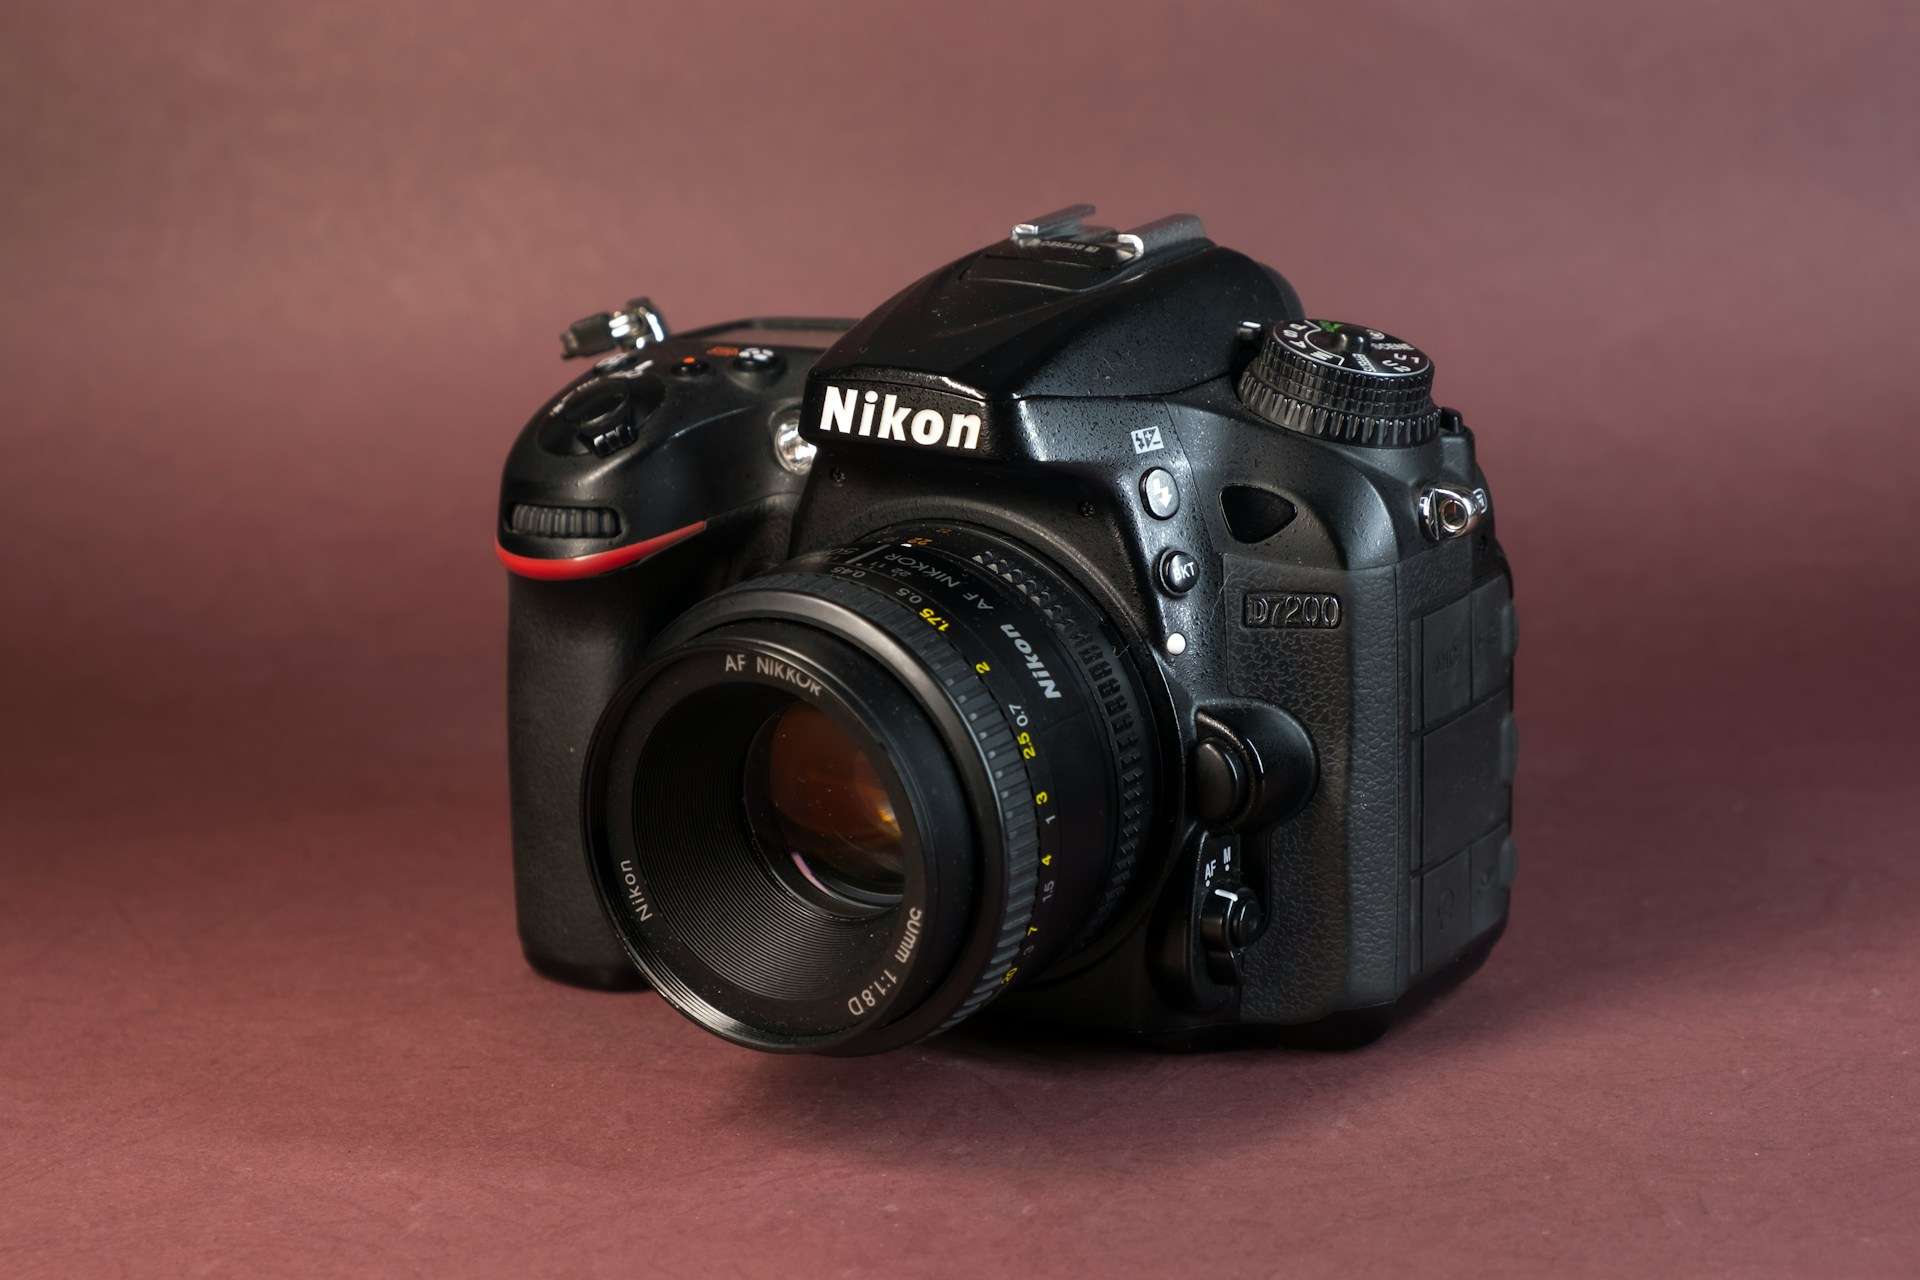 How to Turn On Nikon Camera: A Comprehensive Guide